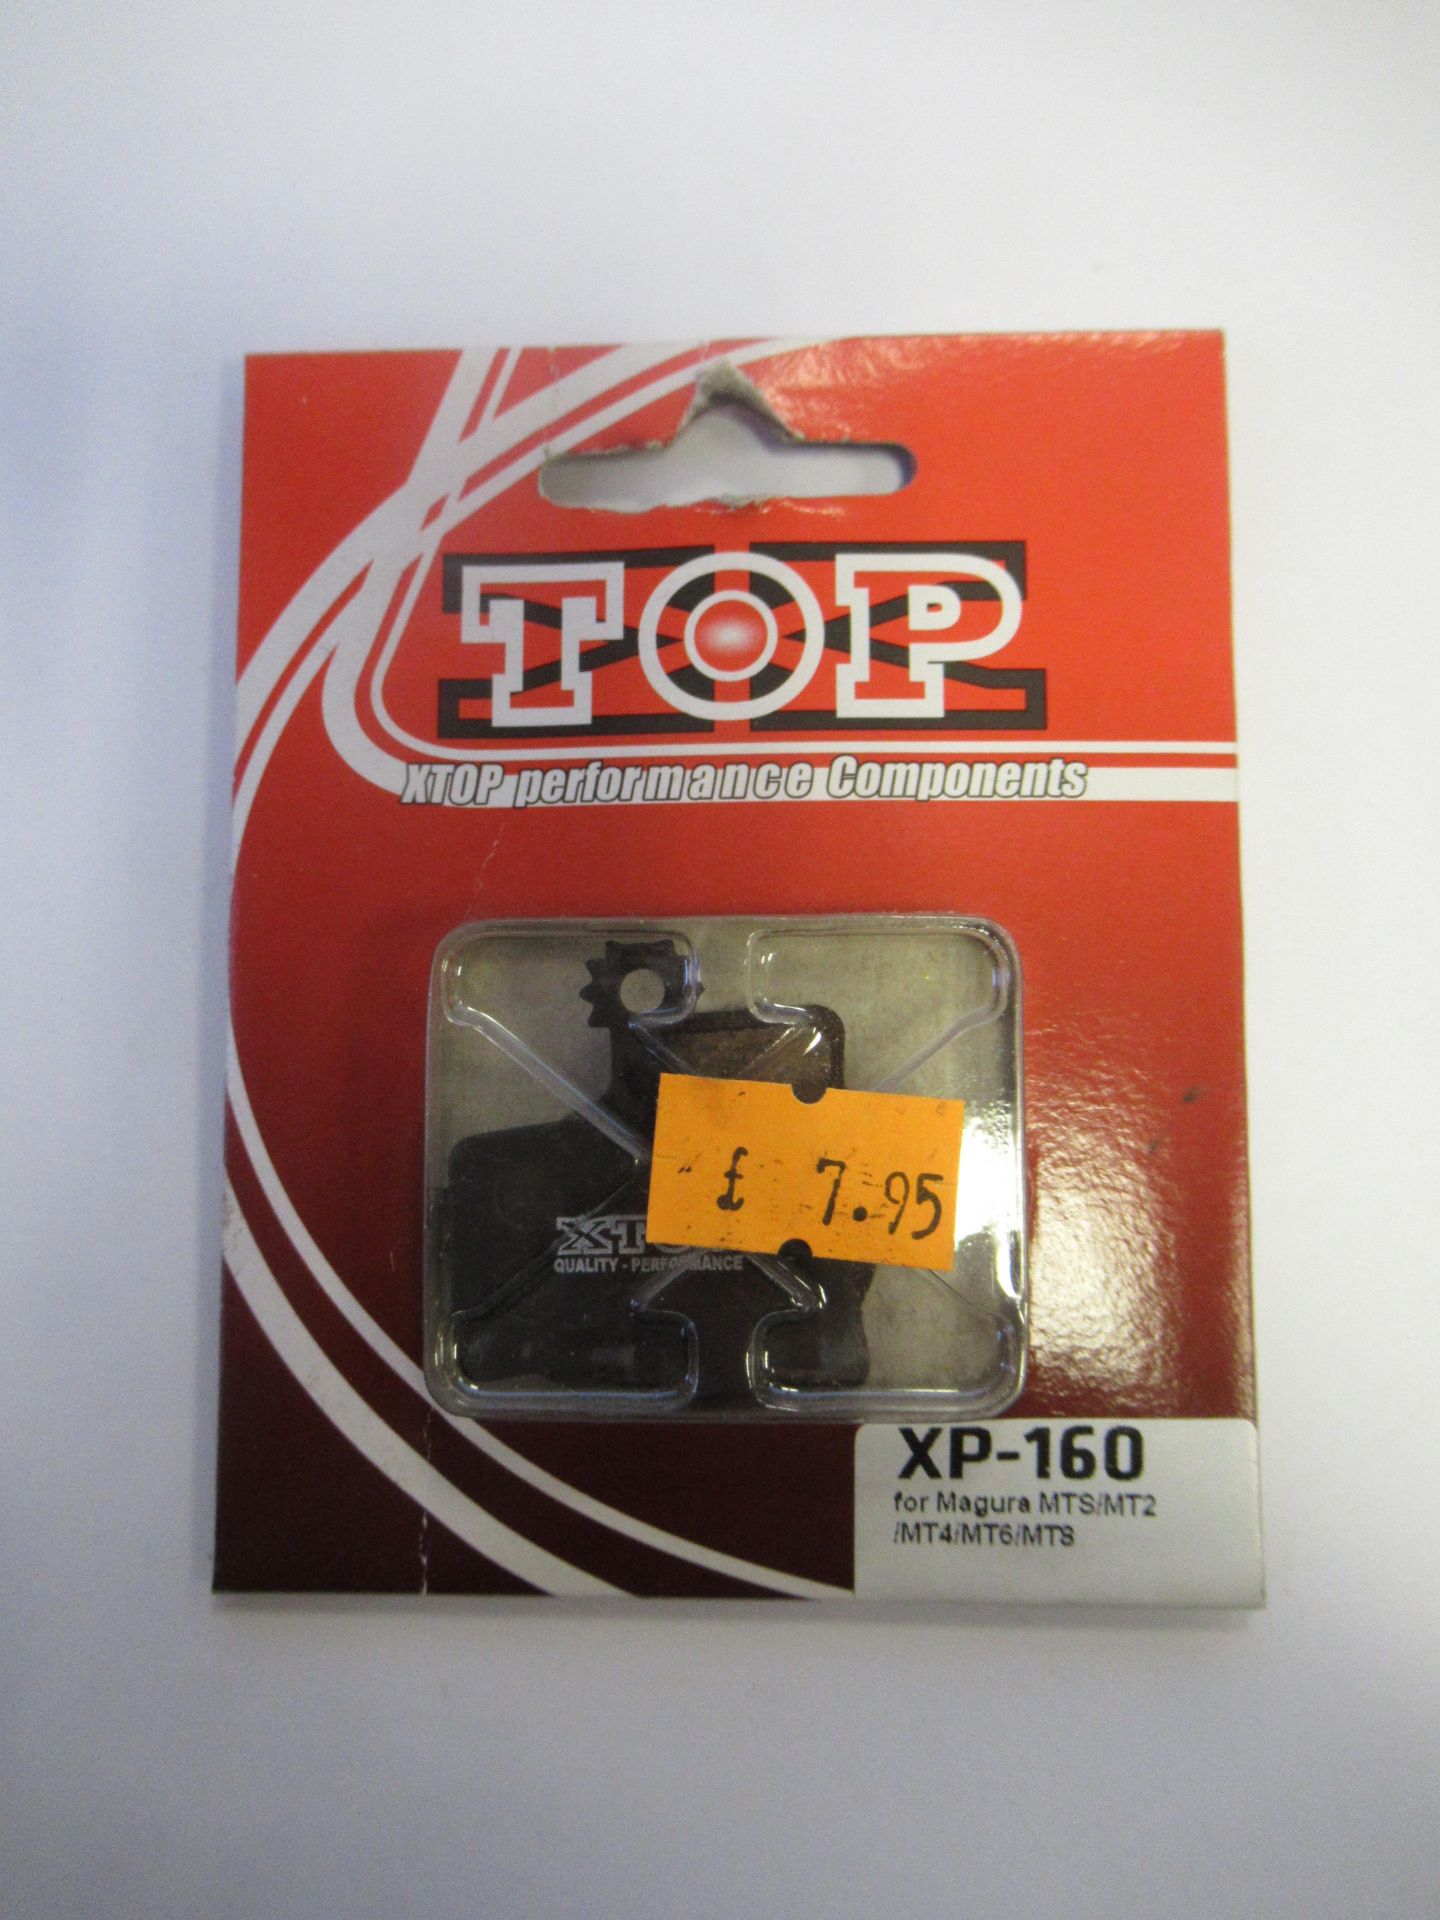 Bicycle parts to include XTOP performance Components, 2x XP-160, RRP £7.95 each and 3x XP-581, RRP £ - Image 10 of 35